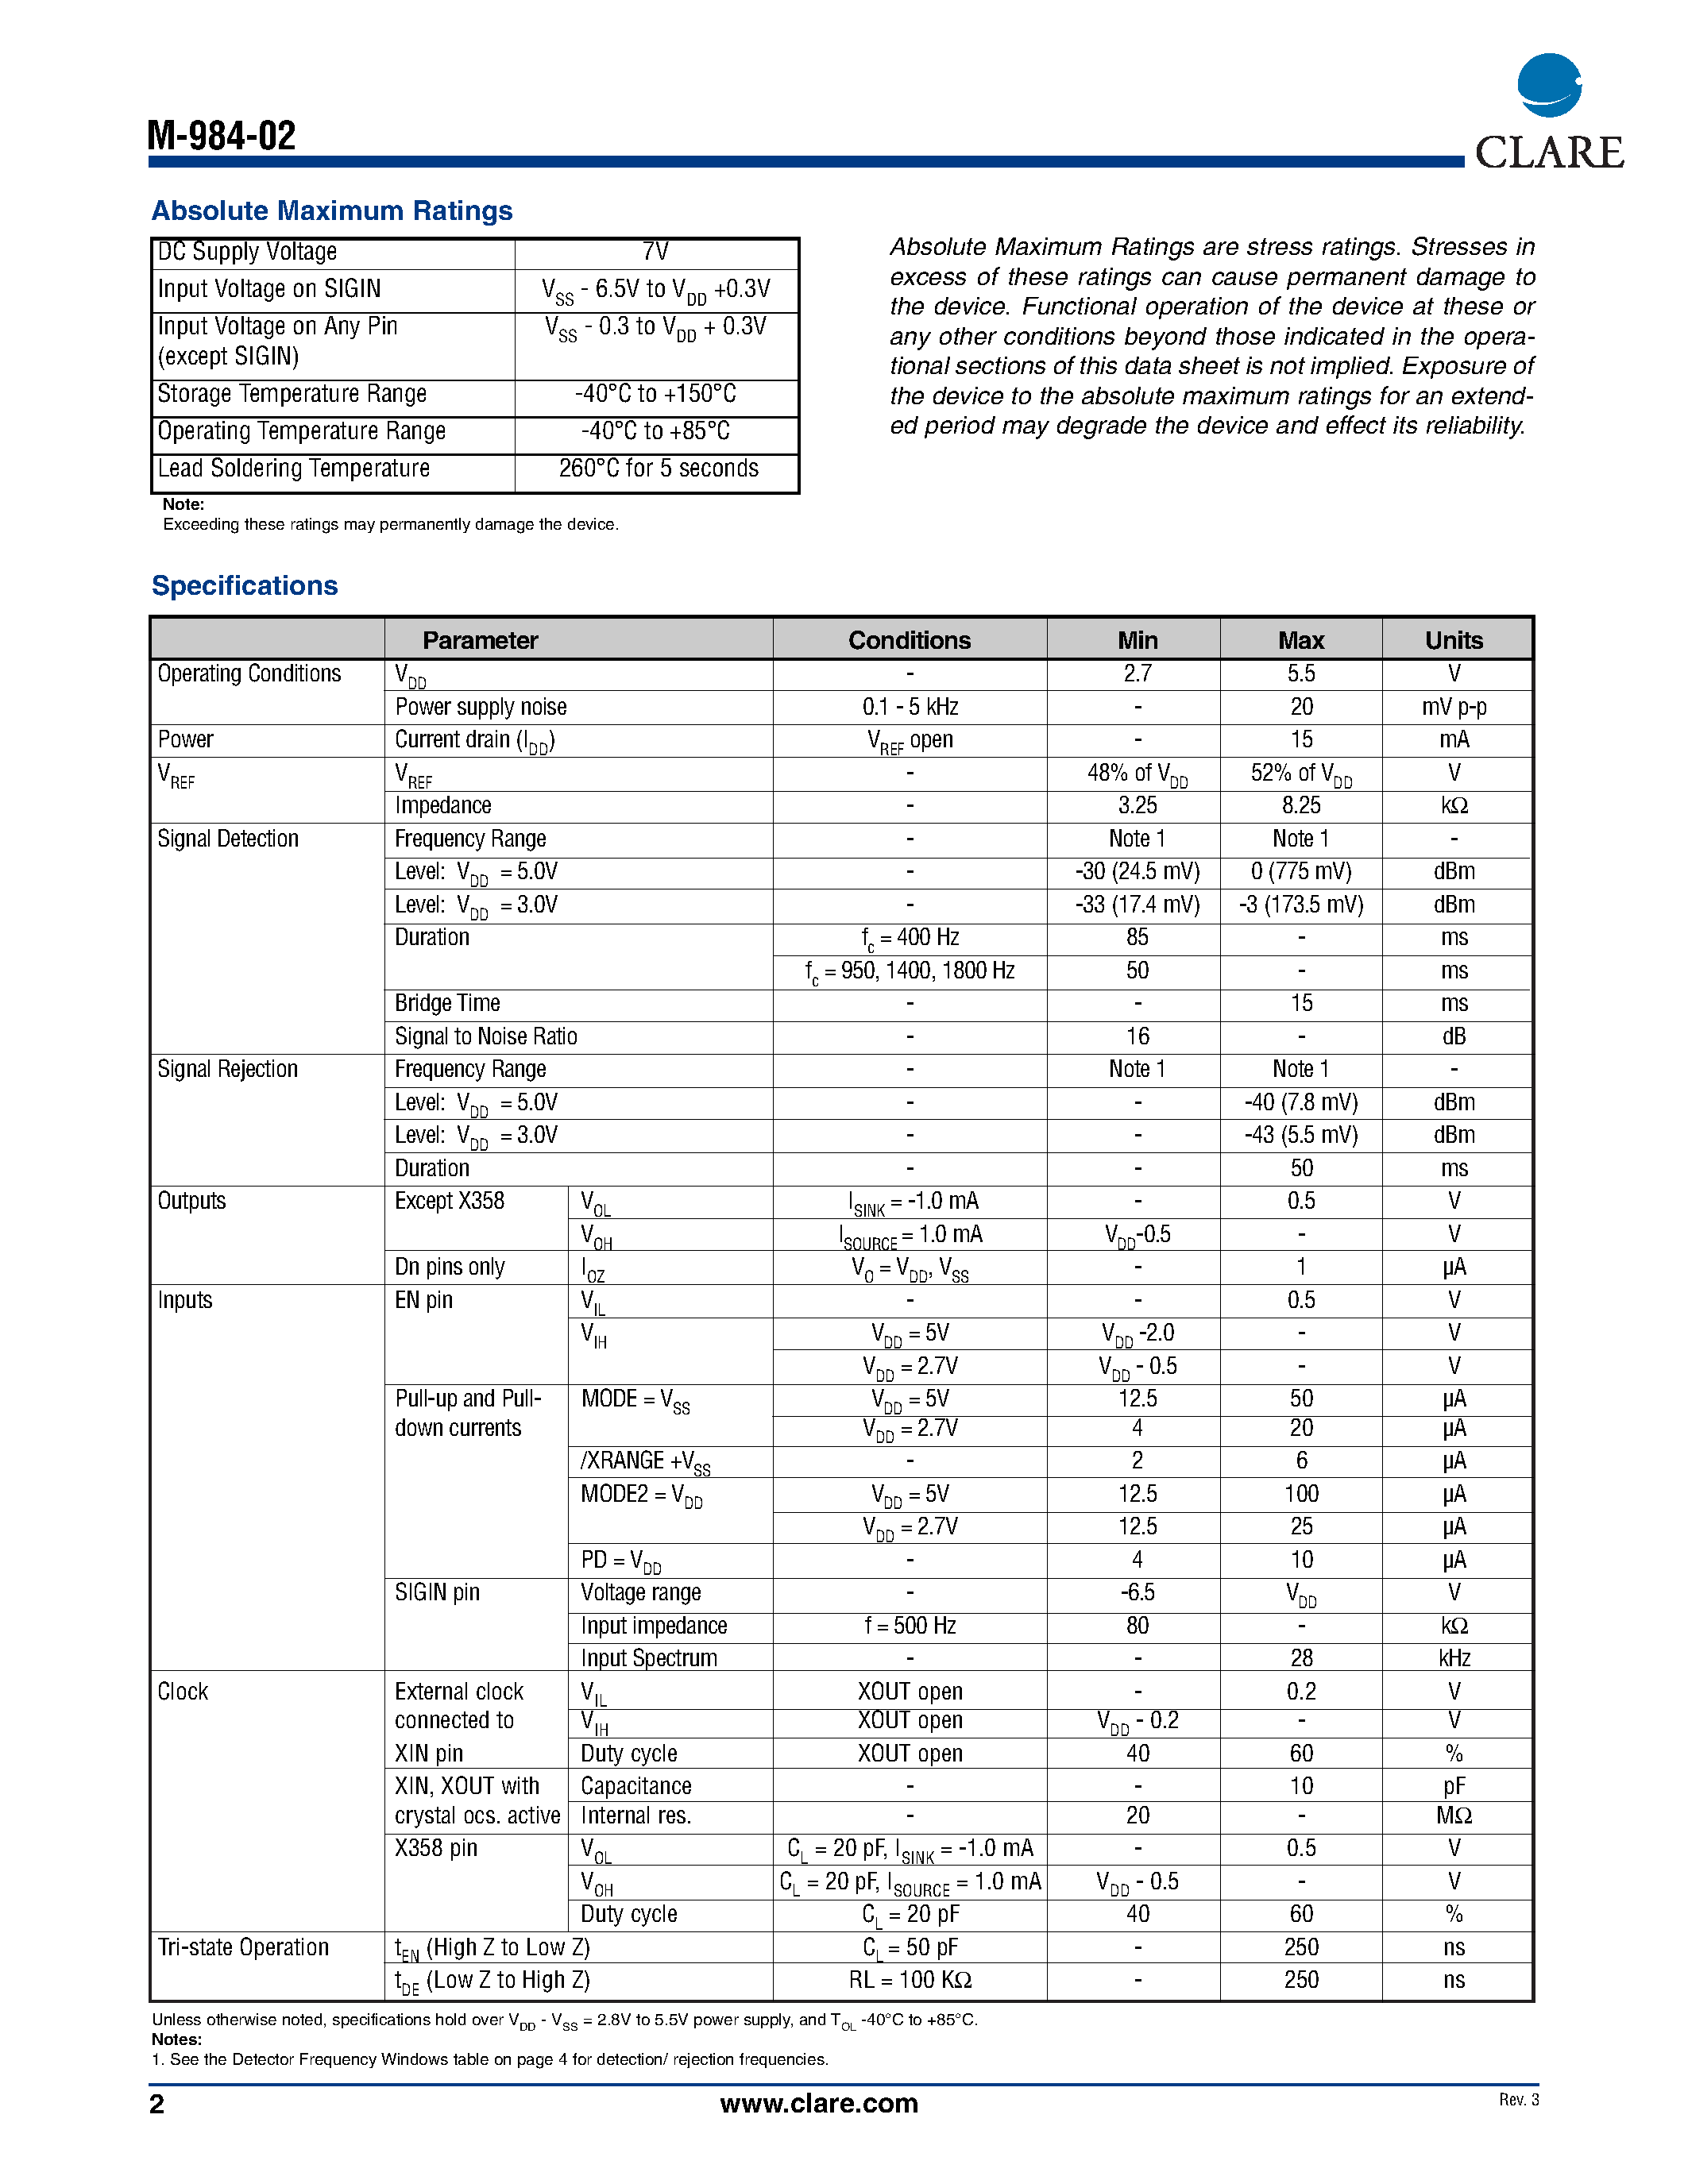 Datasheet M-984-02P - Special Information Tone Detector page 2